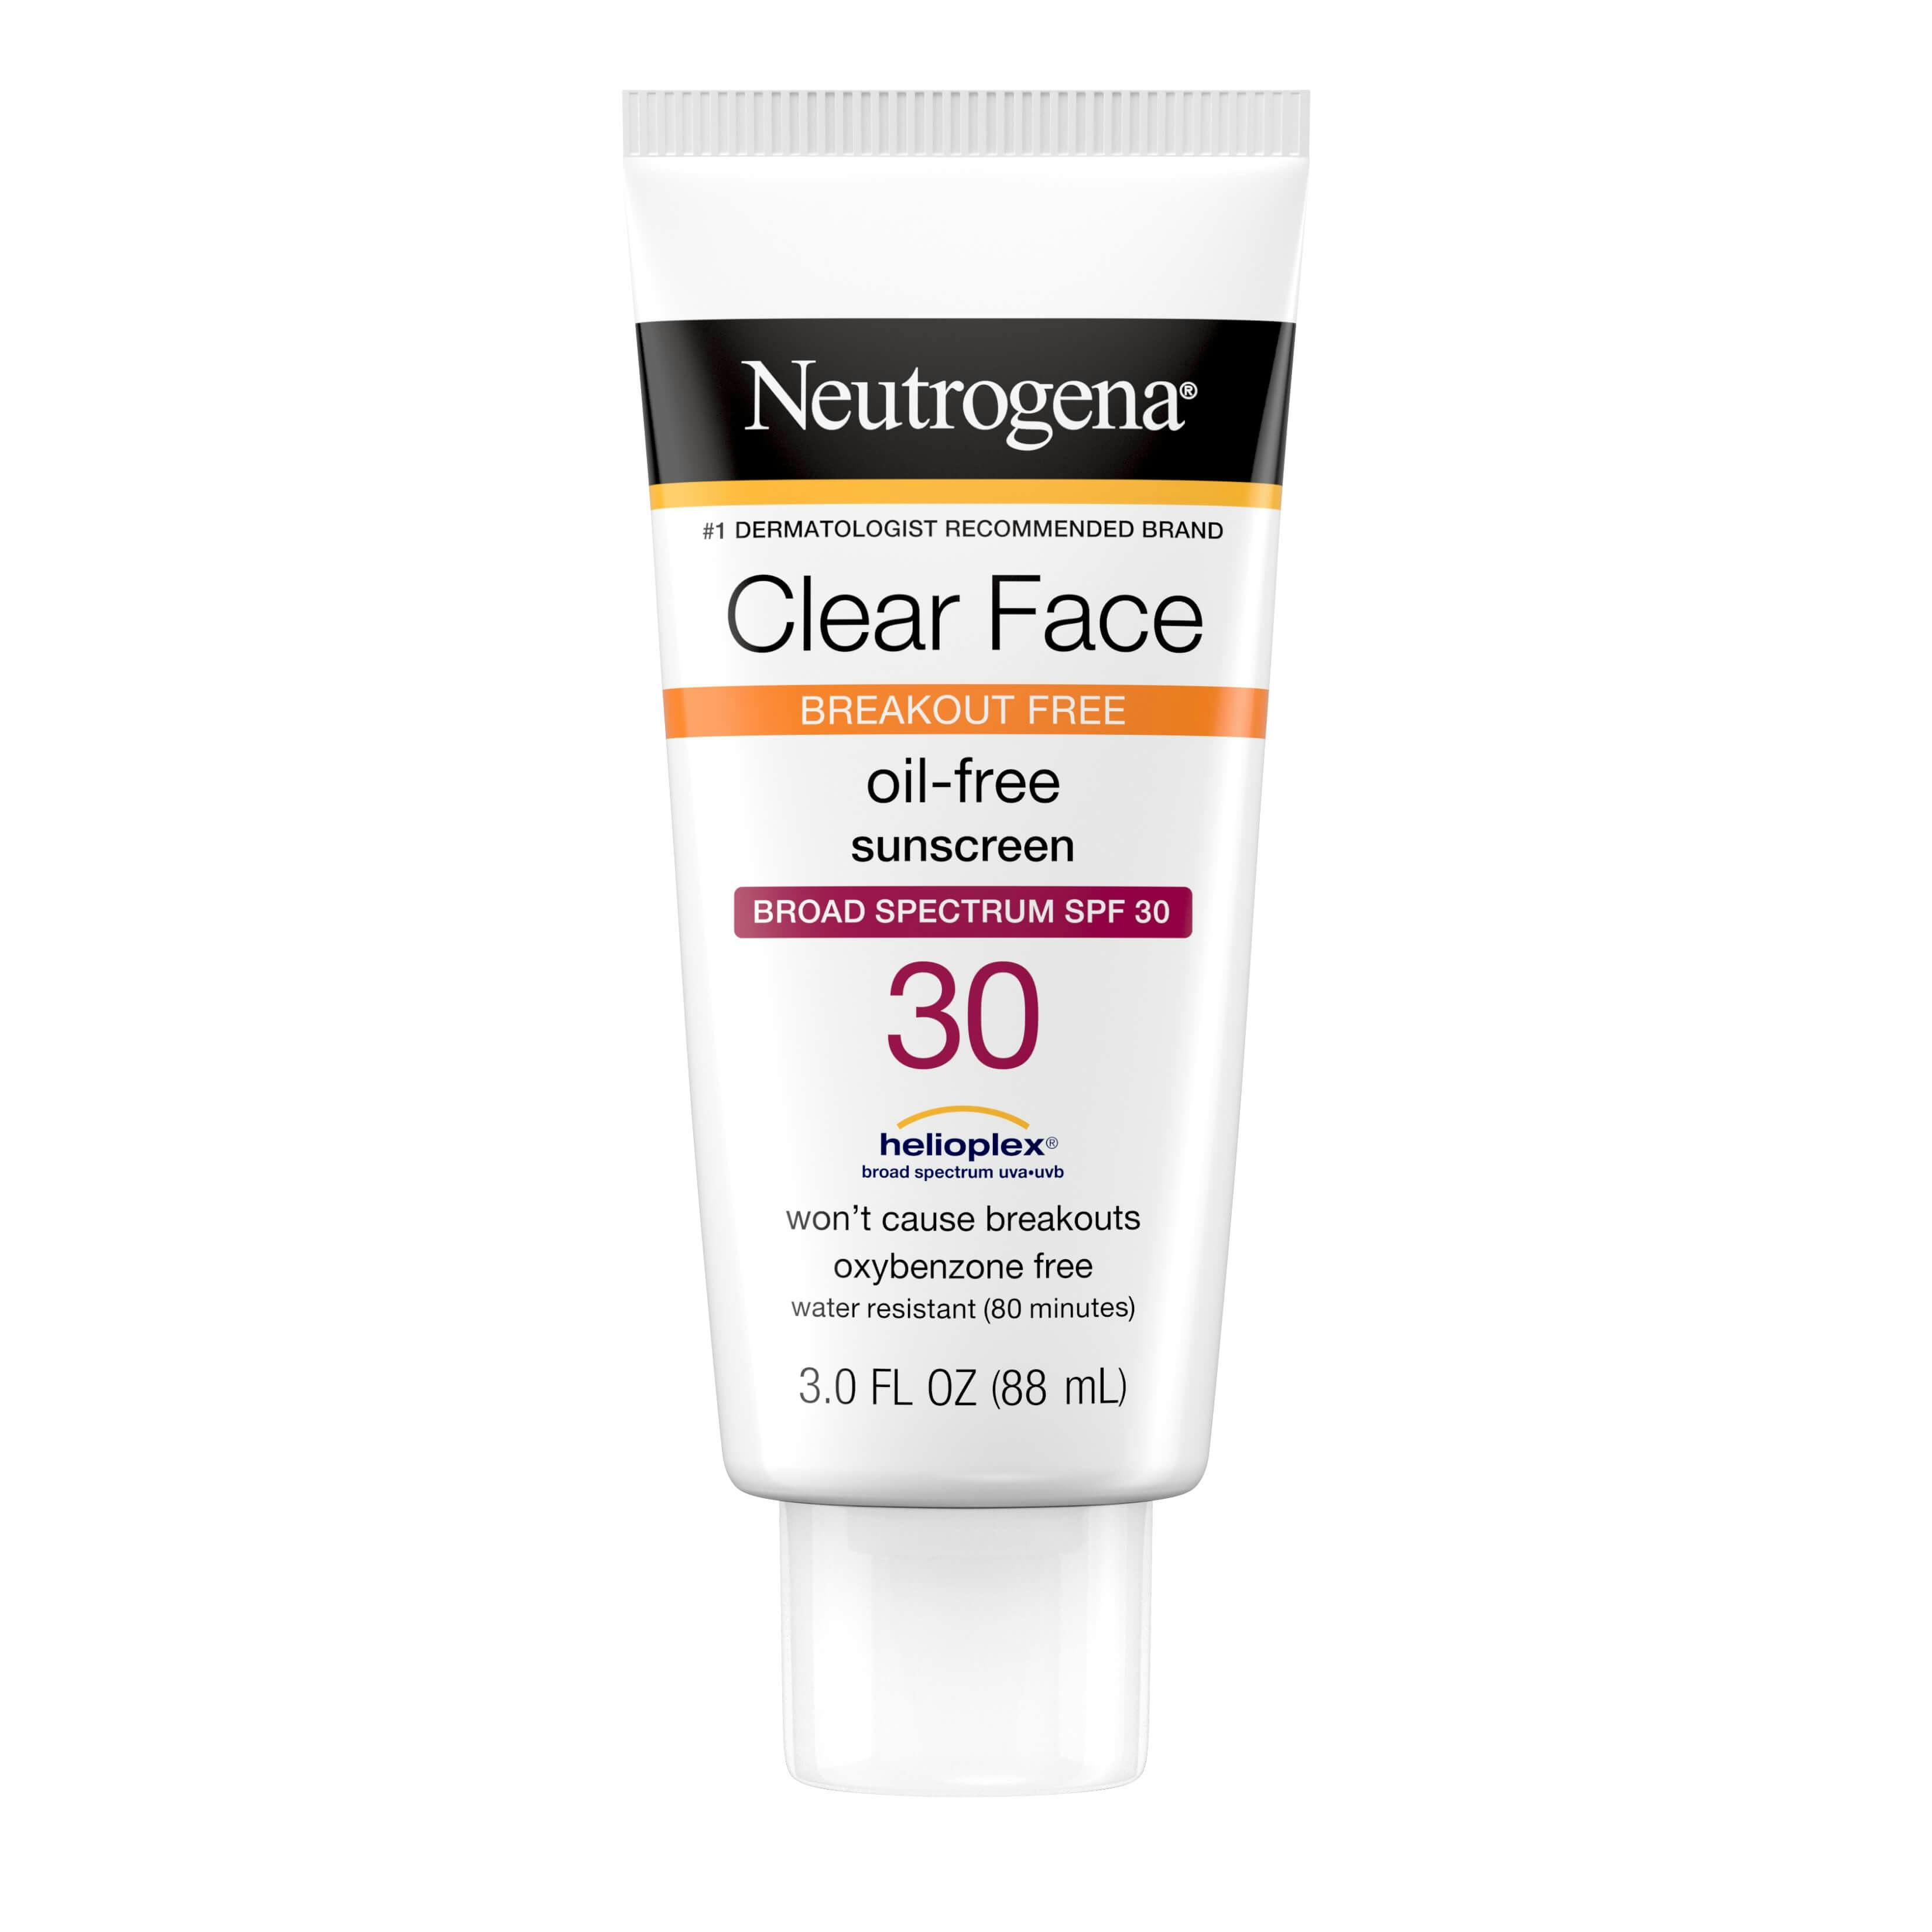 Clear Face Break-Out Free Liquid Lotion Sunscreen Broad Spectrum SPF 30